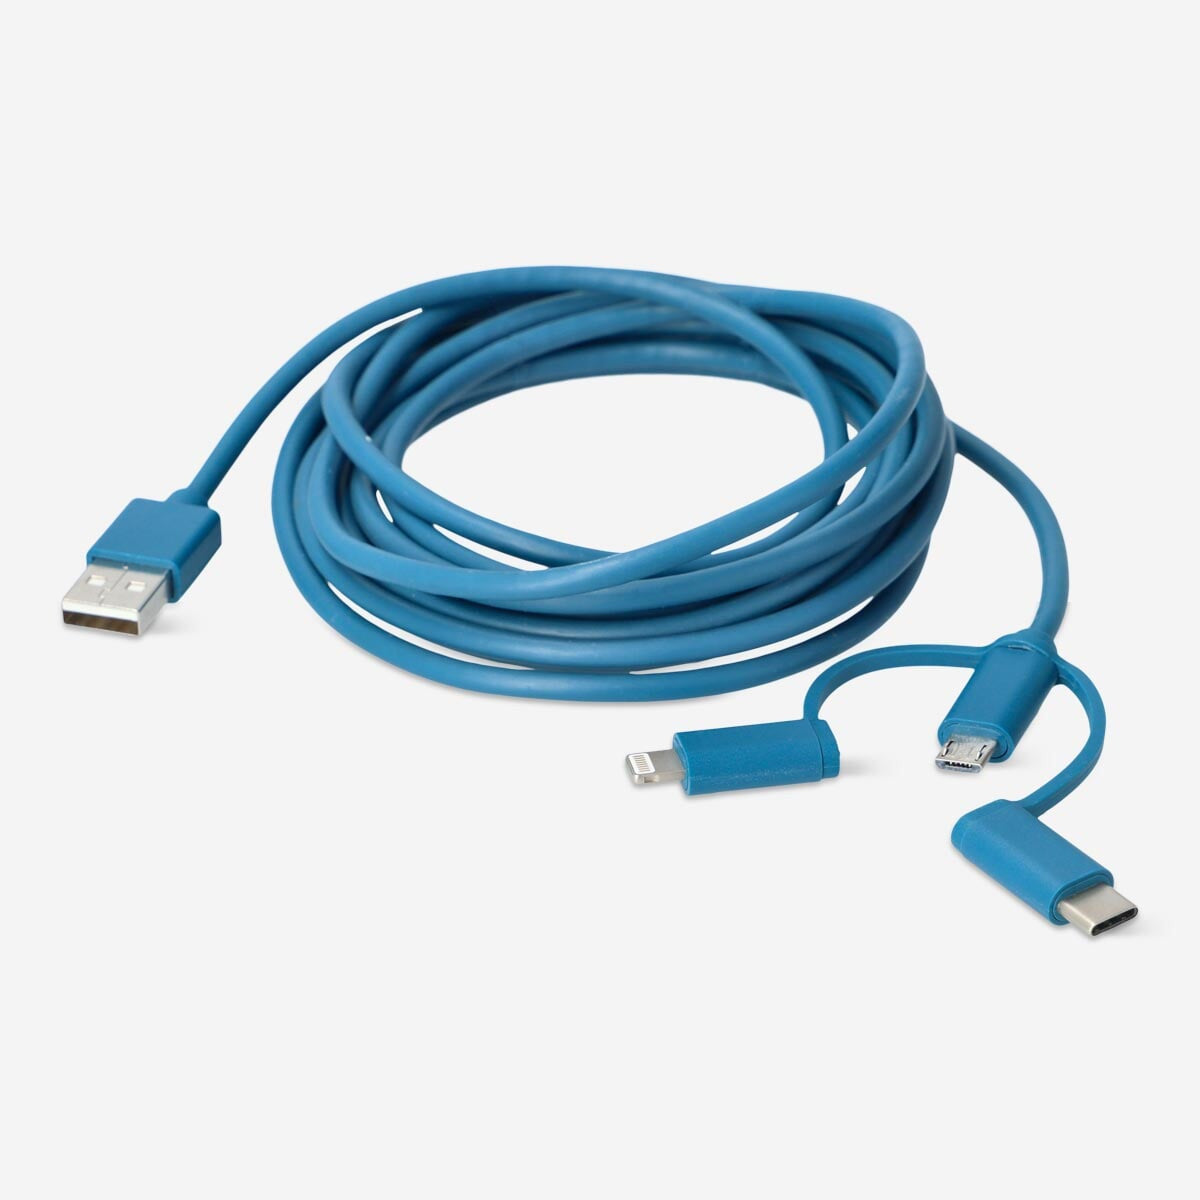 Charging cable. For USB-C, Micro USB and lightning Media Flying Tiger Copenhagen 